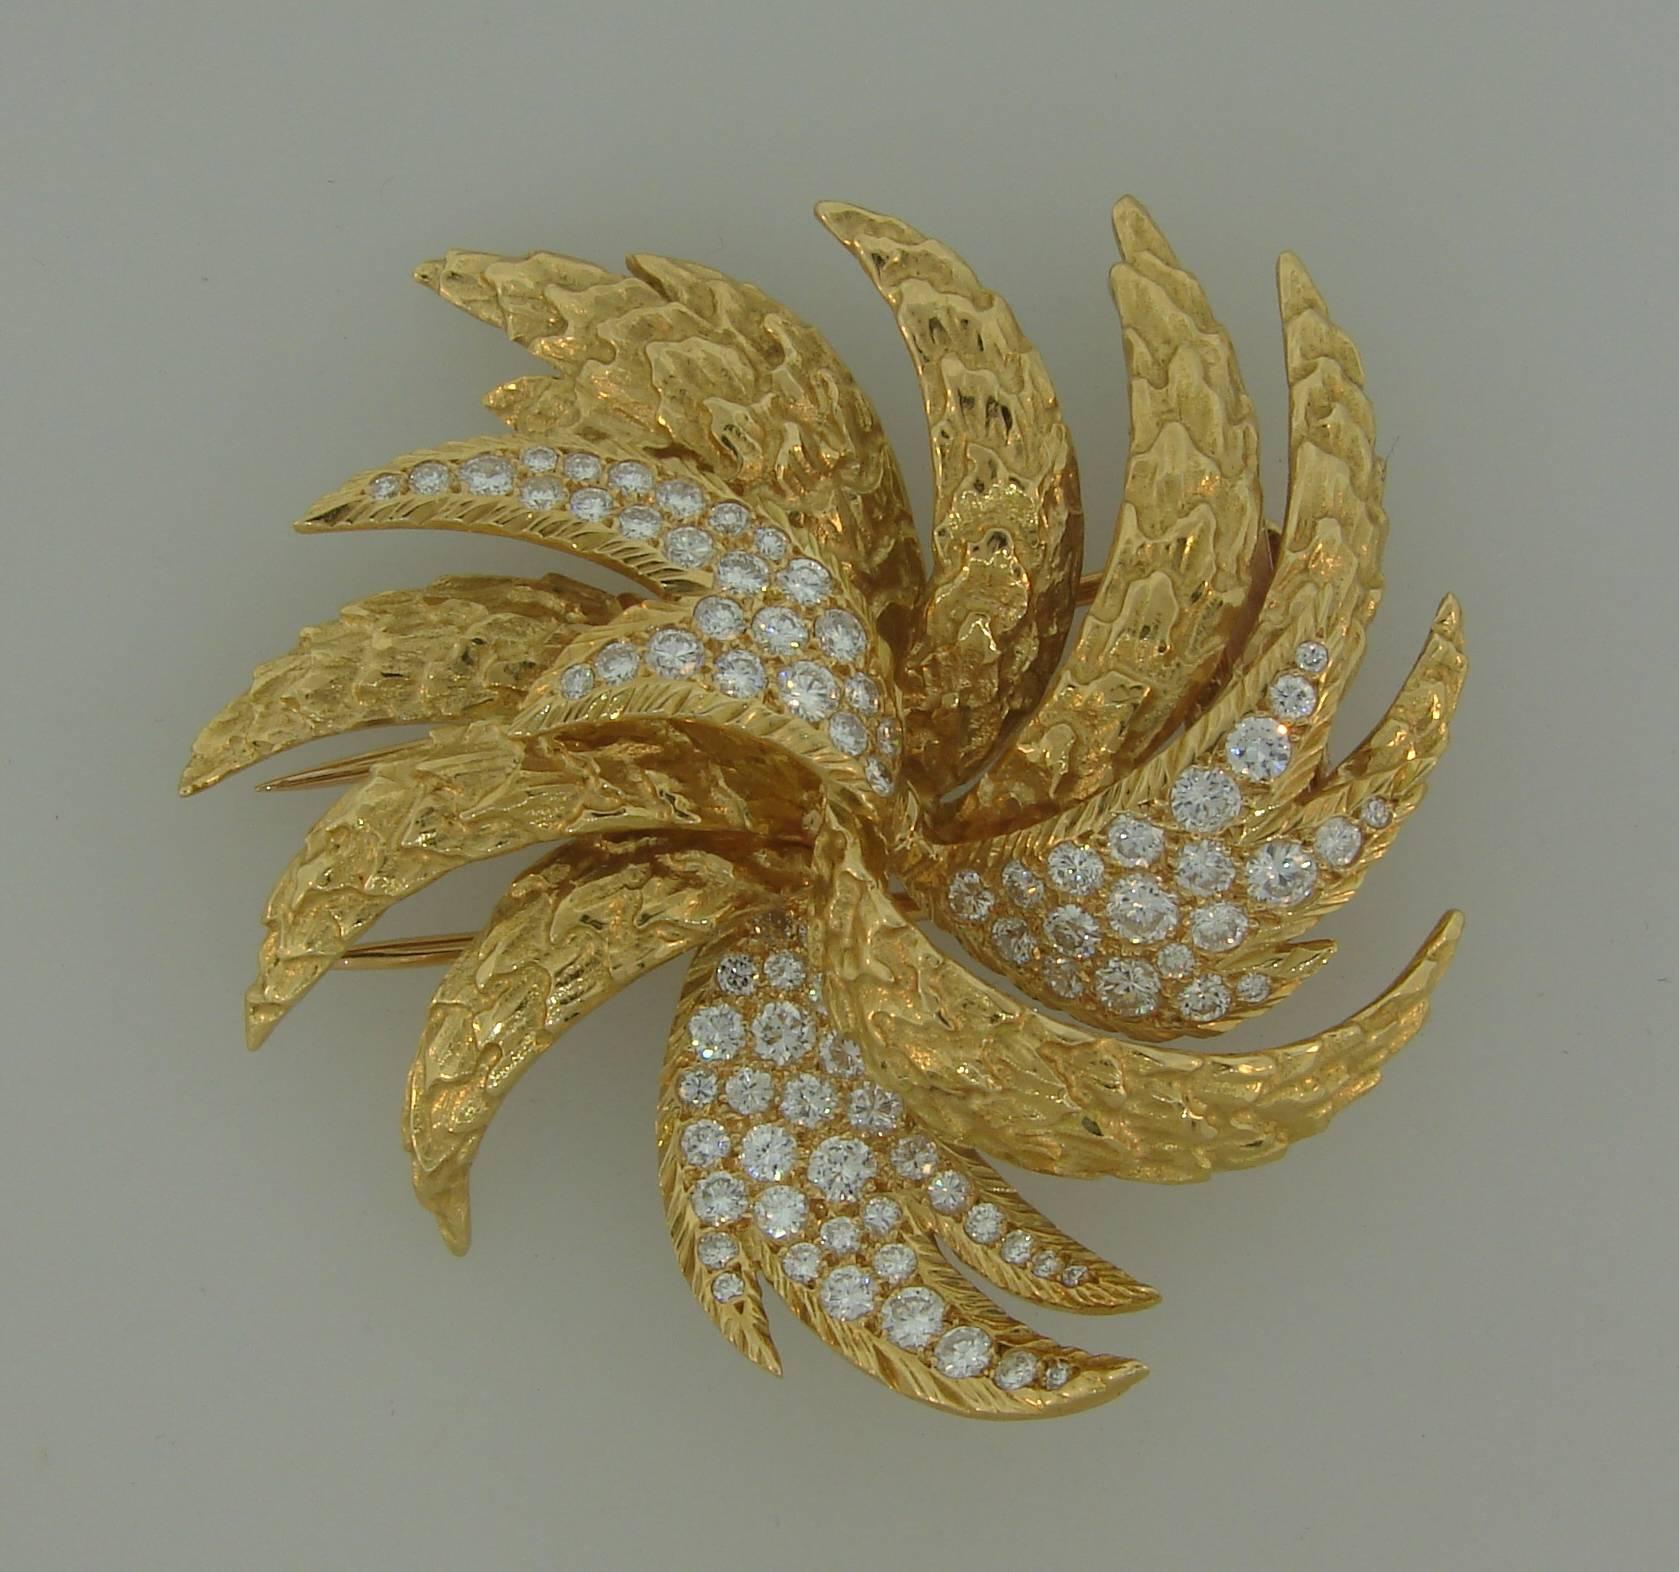 Elegant clip created by Cartier in Paris in the 1980s. Chic and wearable, it is a great addition to your jewelry collection. The brooch will make a stylish accent to any outfit.
Made of 18 karat yellow gold and set with round brilliant cut